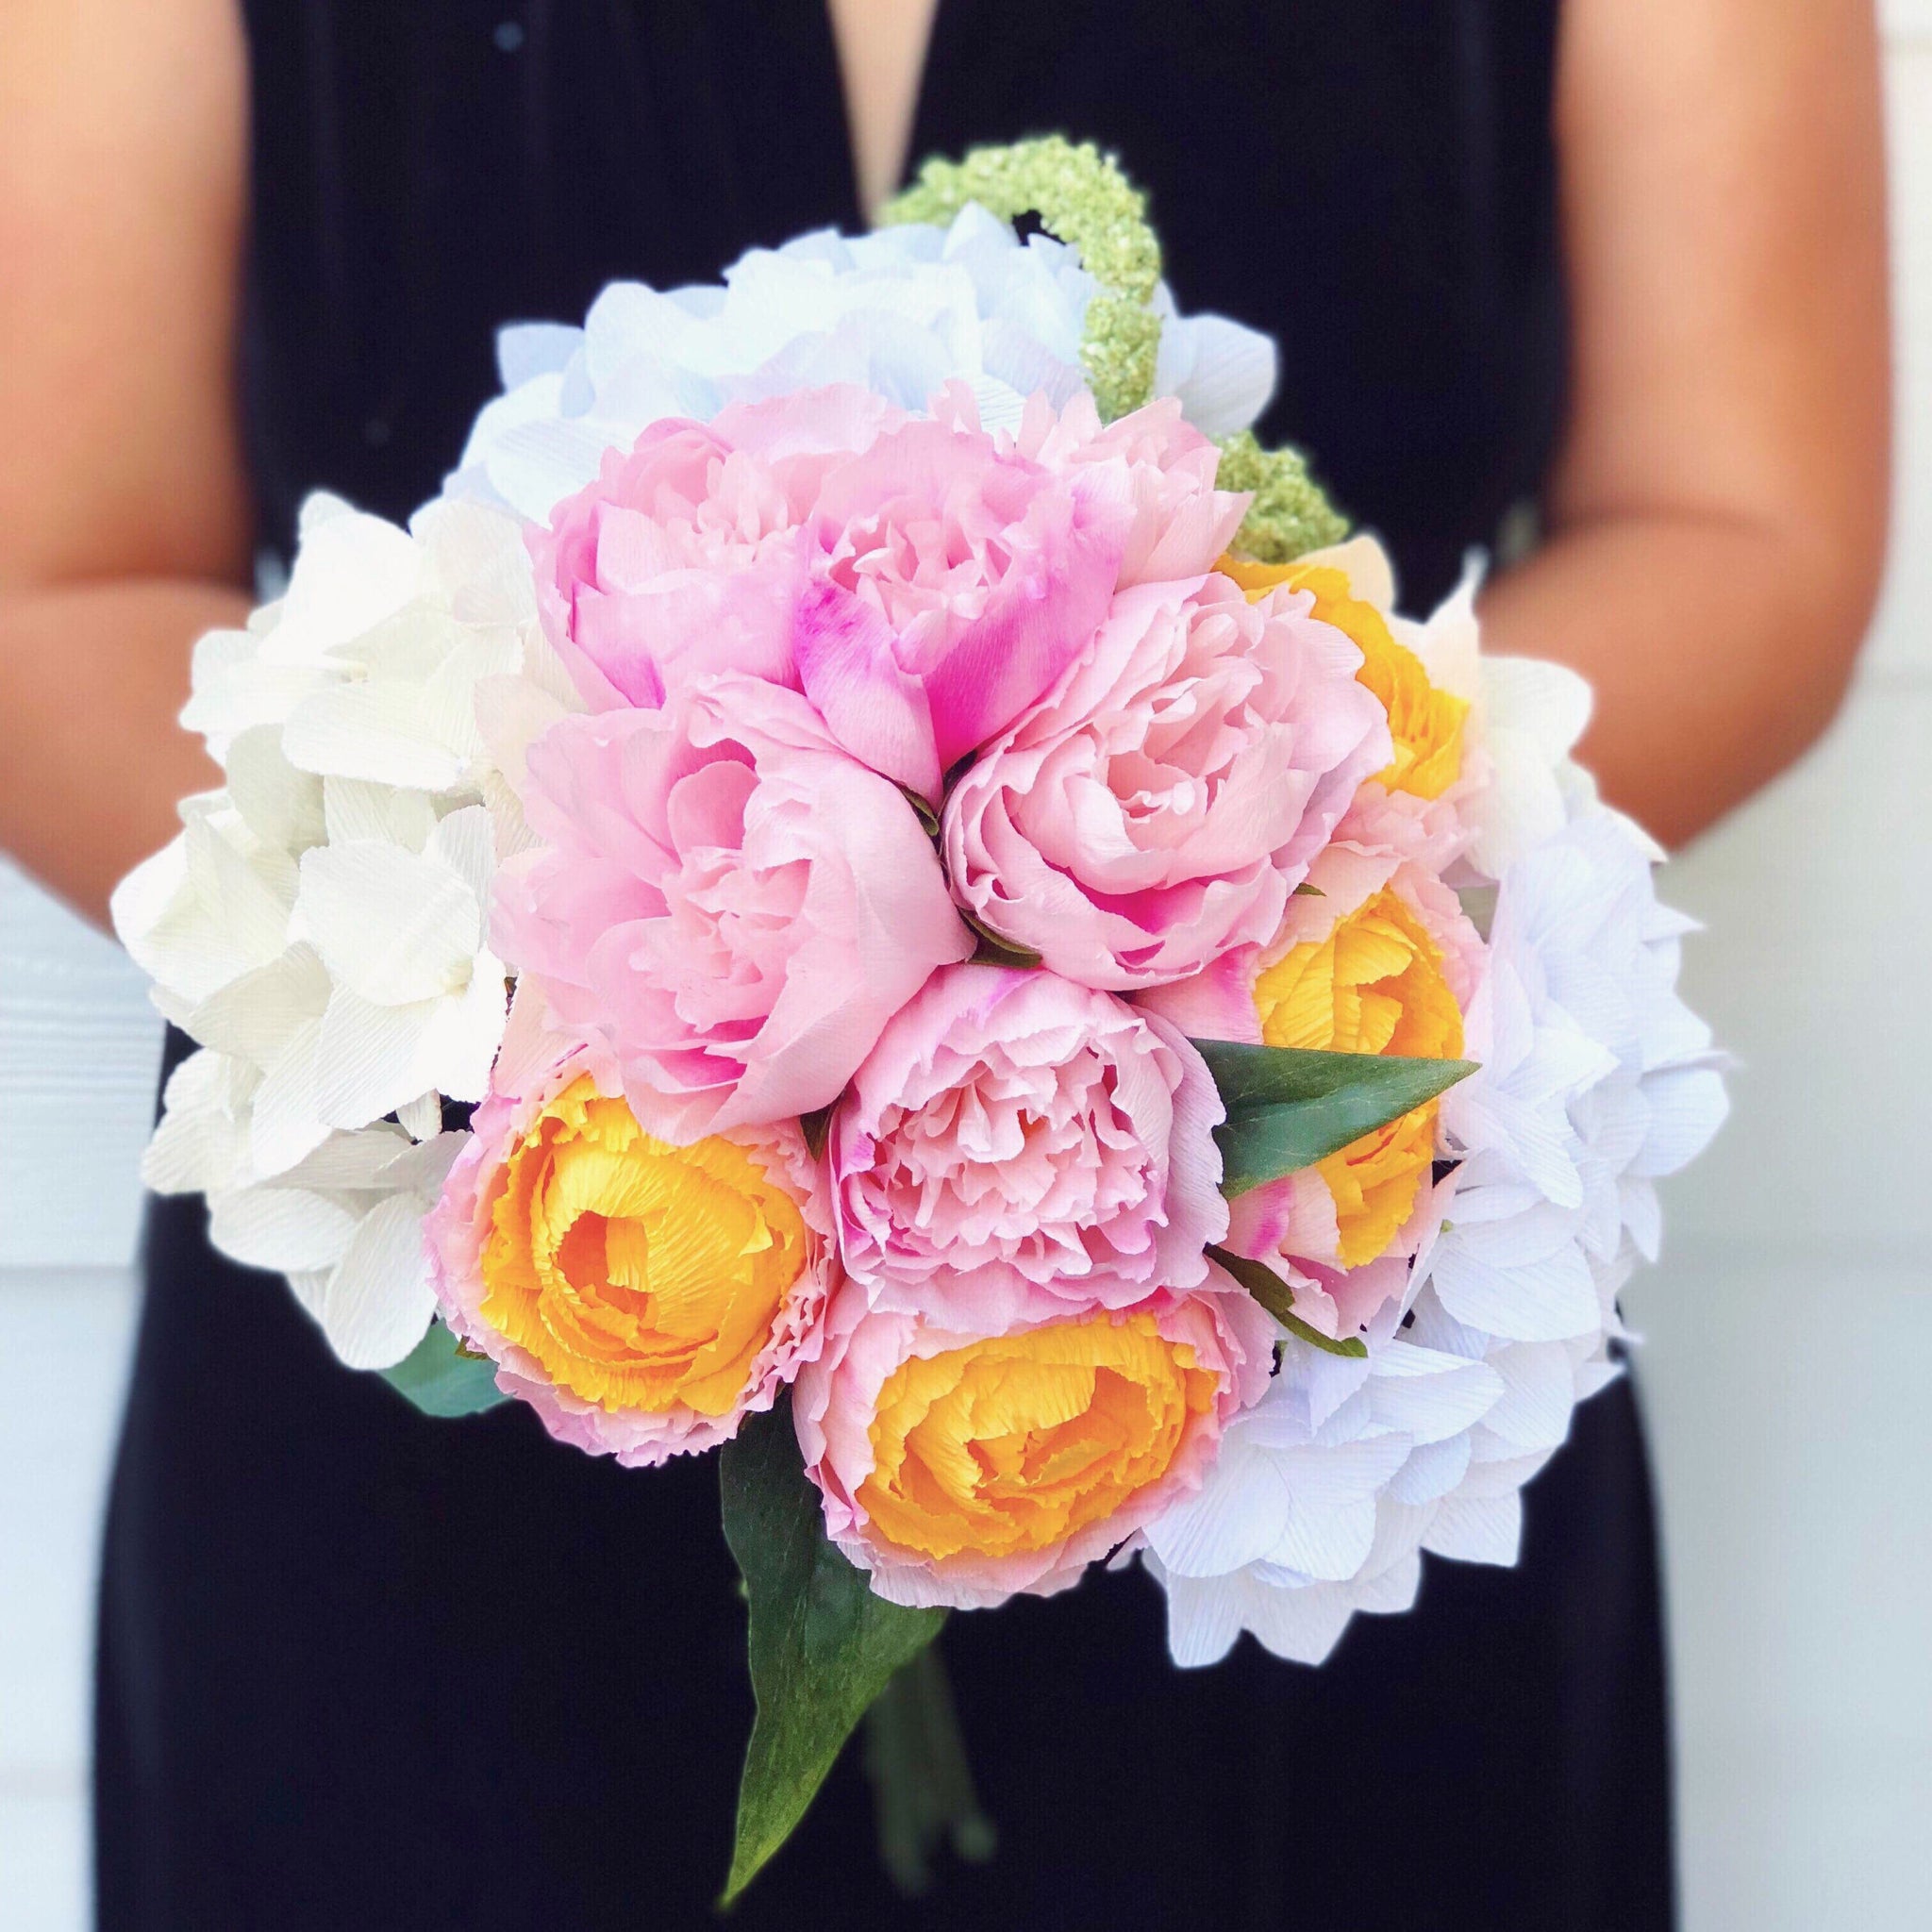 Blush peonies and Hydrangea Bouquet